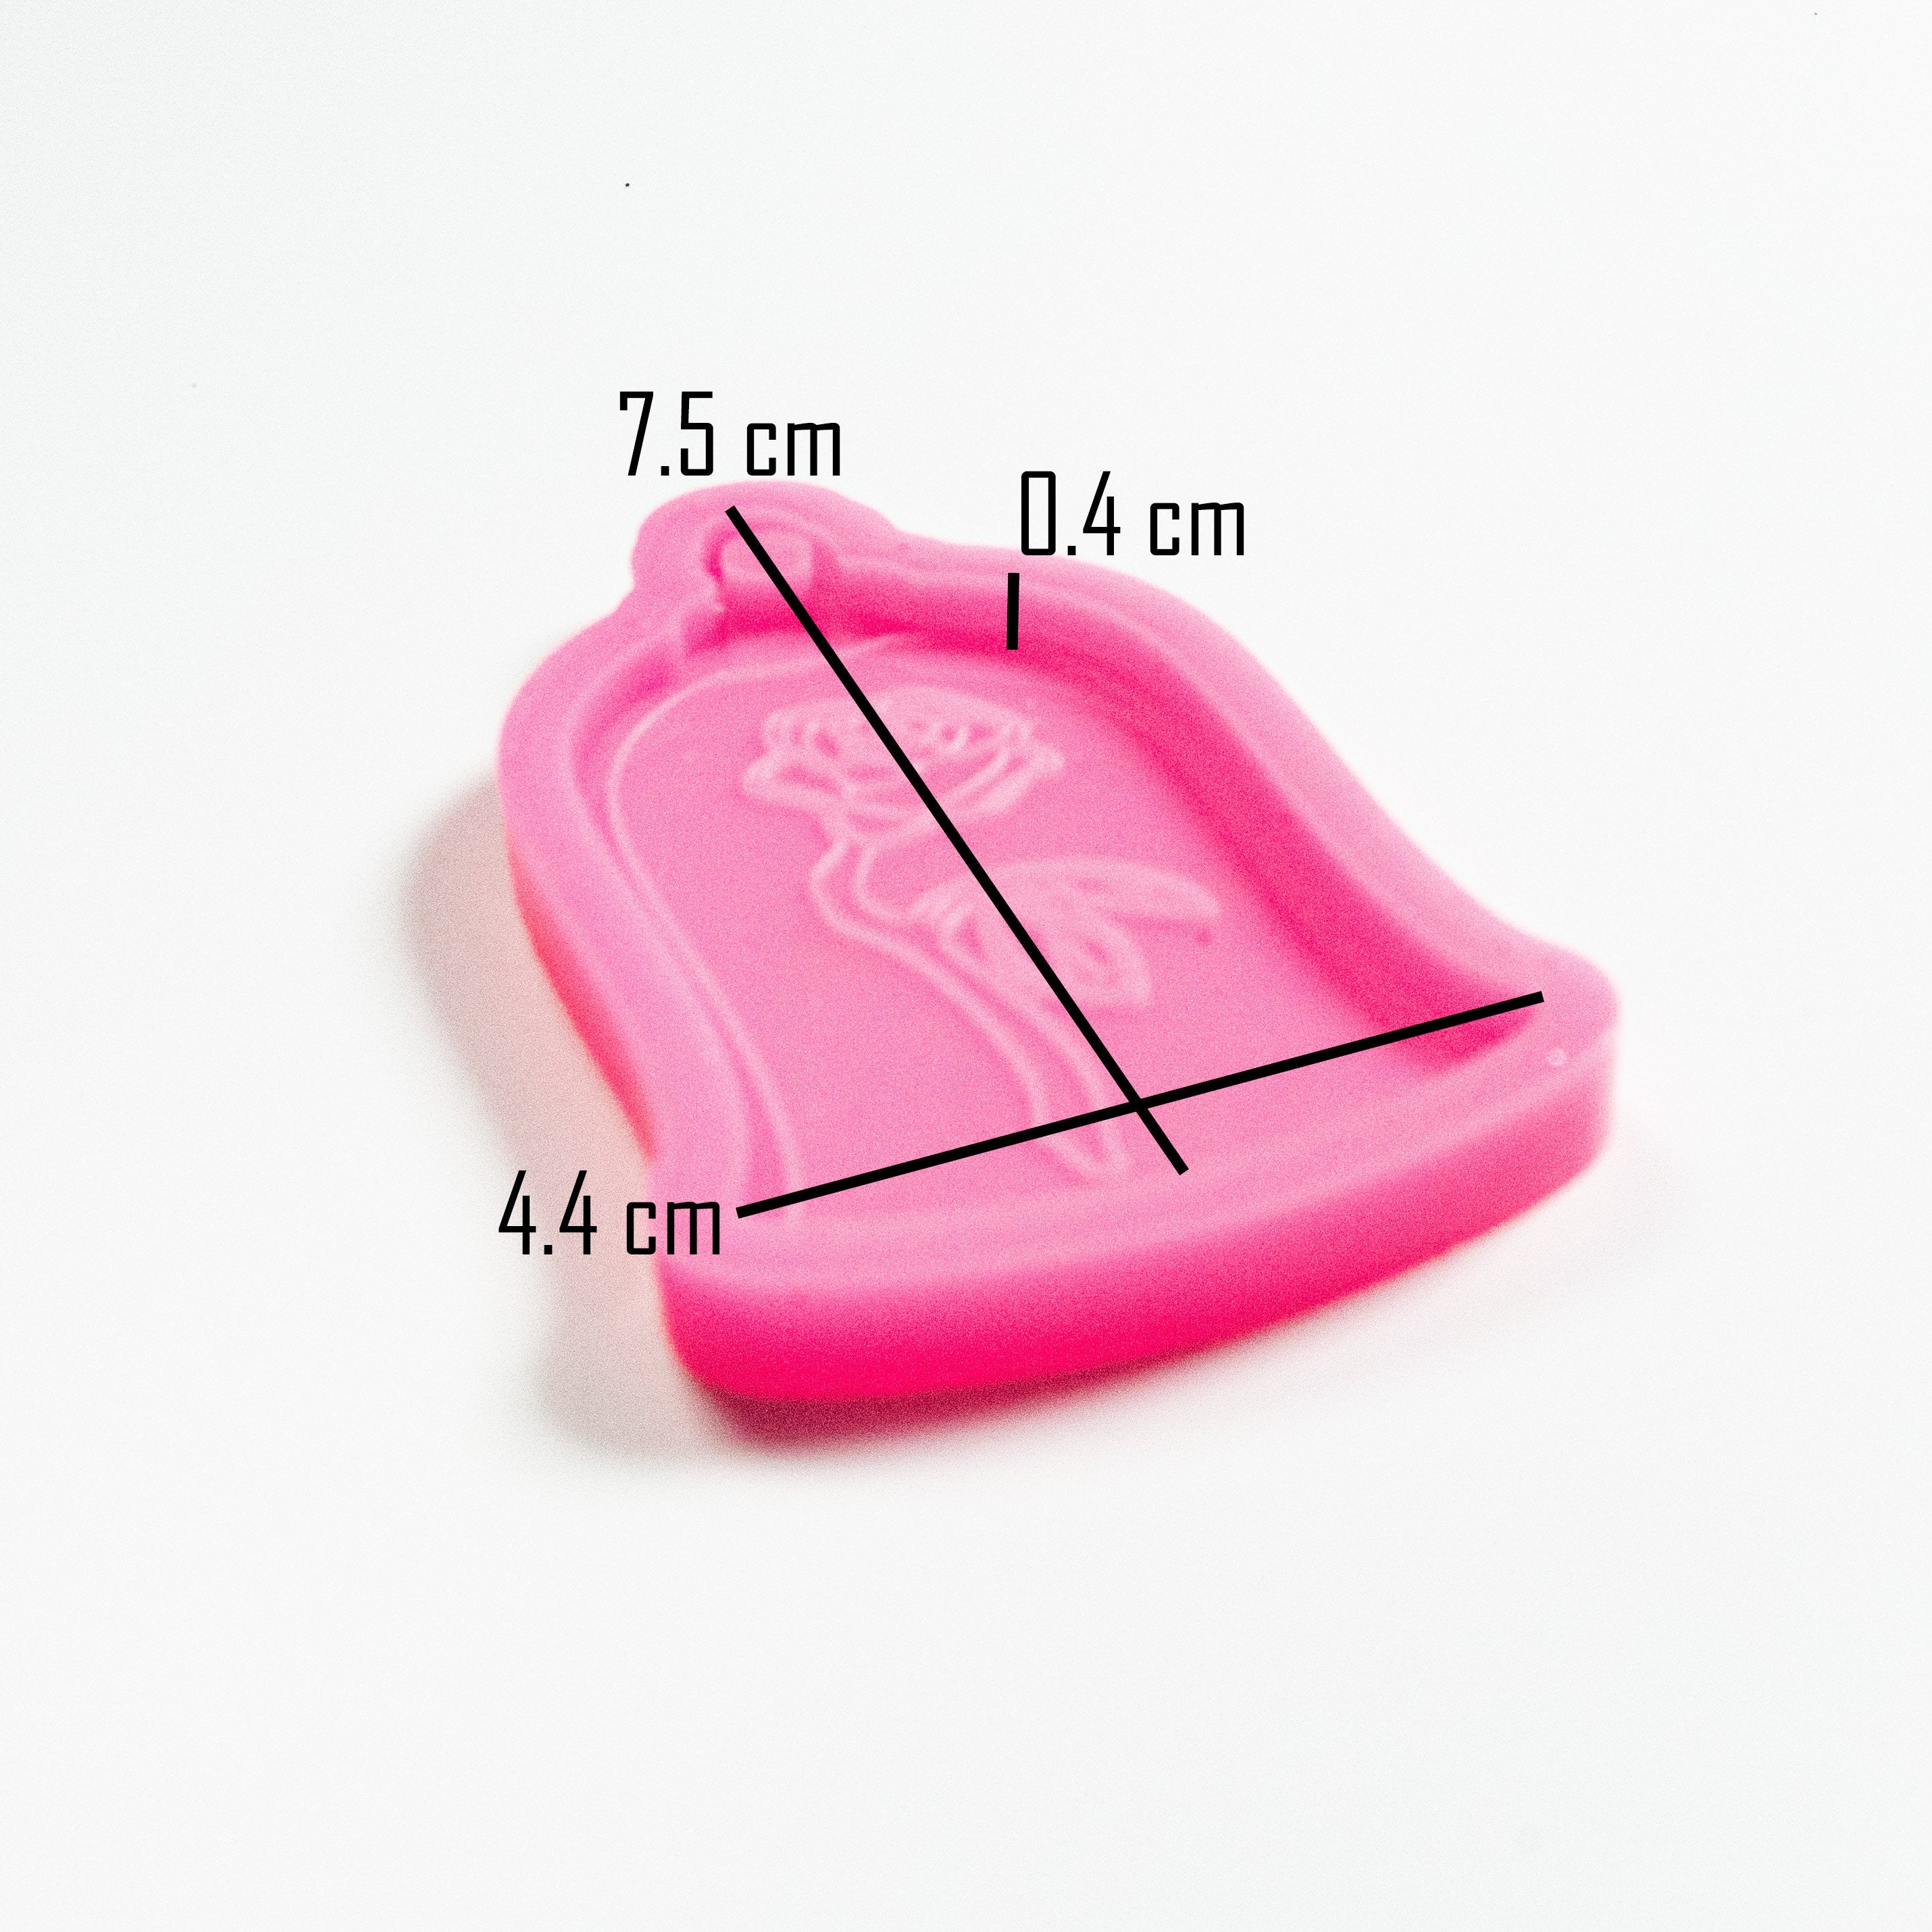 Enchanted Rose Shiny Silicone Mold for Epoxy Resin Keychain - Jewelry Making - Ornament Silicone Mold